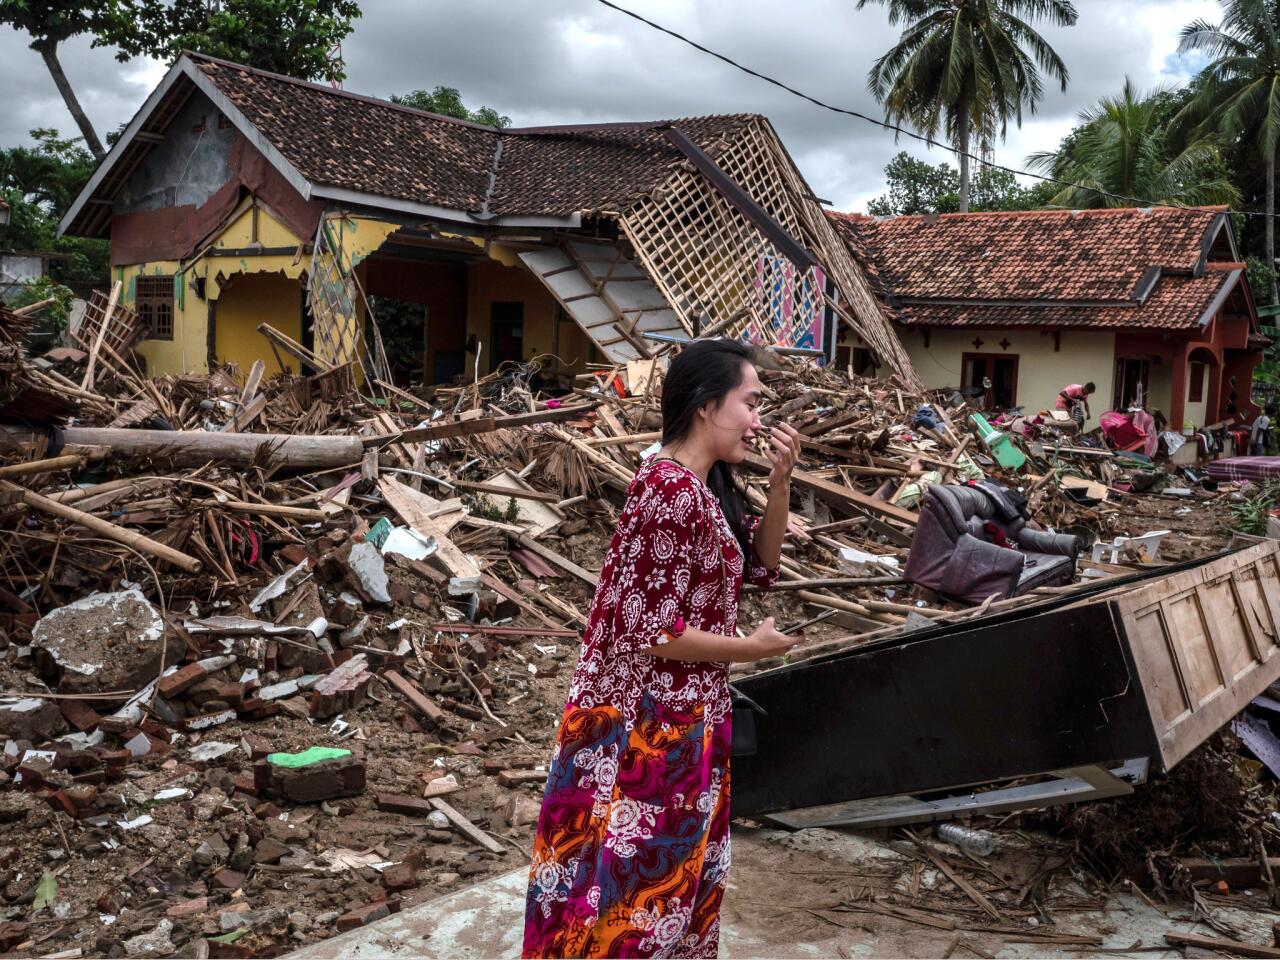 A distraught woman looks for her belongings at a house destroyed by the tsunami in Indonesia.